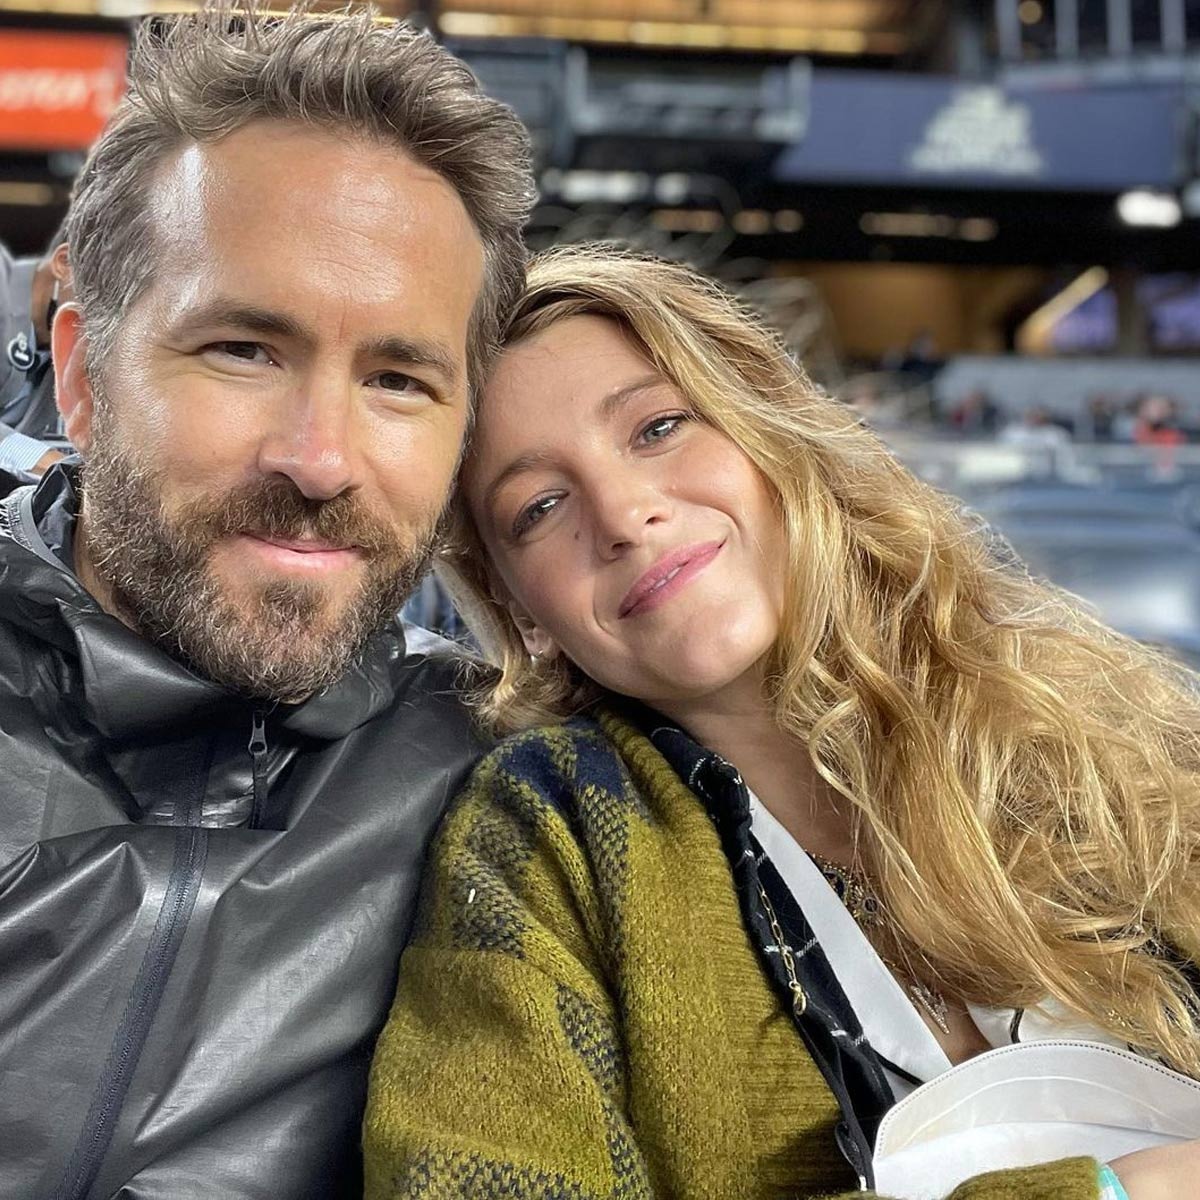 Blake Lively Tempted to Get Thigh Tattoo of Ryan Reynolds’ Face